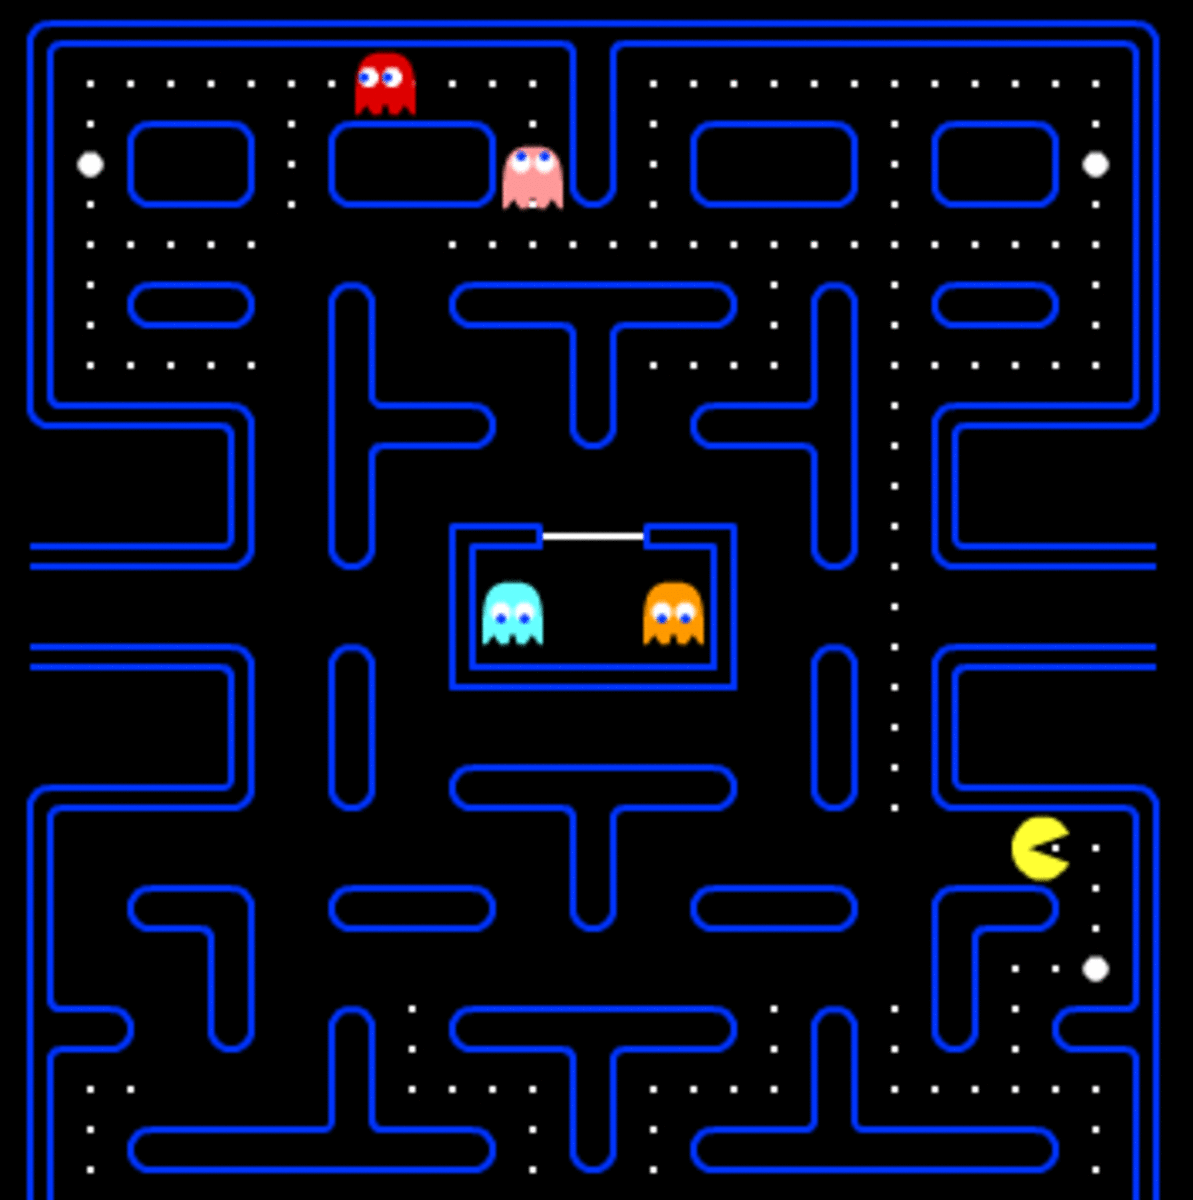 The famous wrap-around maze of "Pac-Man."